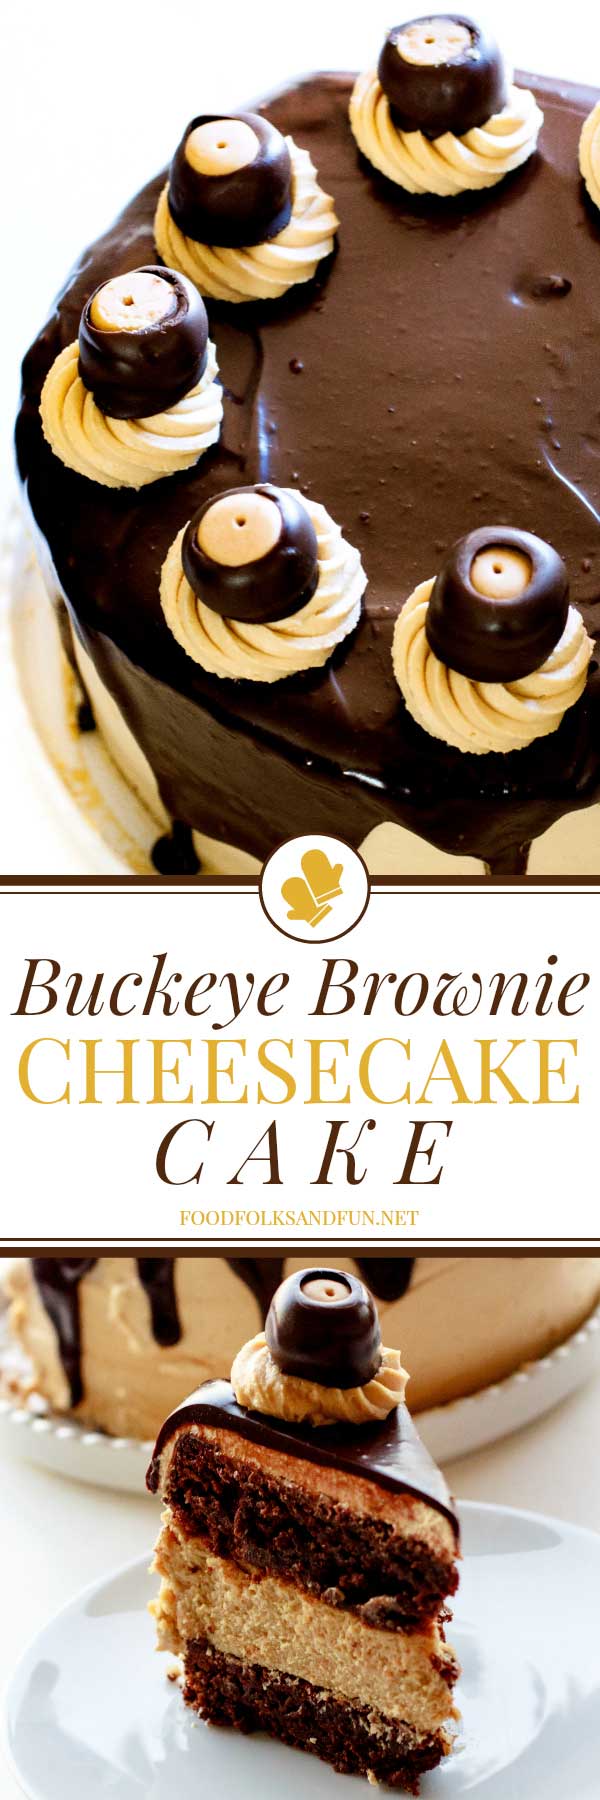 A collage of Buckeye Brownie Cheesecake Cake with text overlay for social media